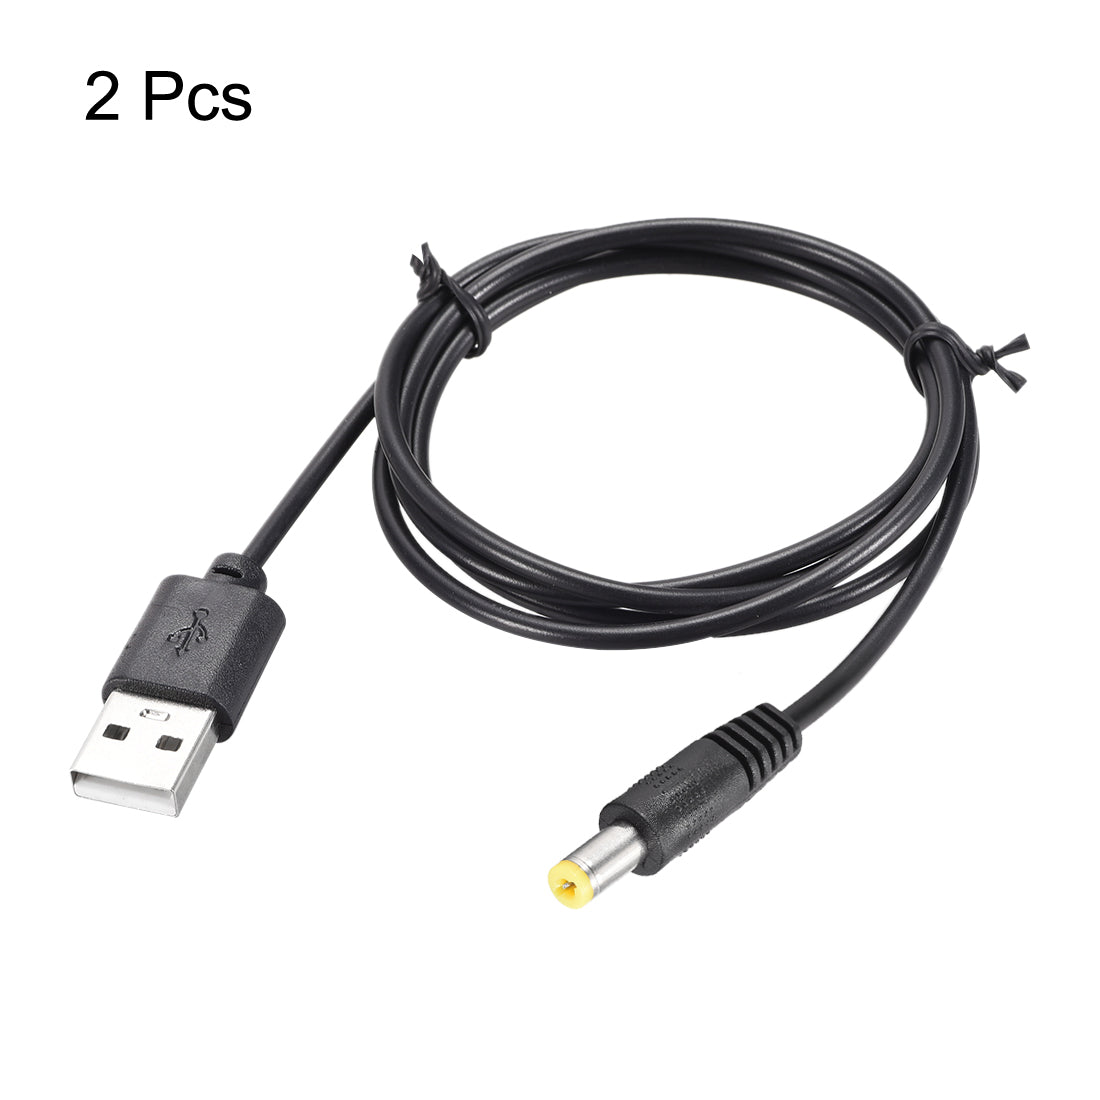 uxcell Uxcell 2pcs 1M DC Male Power Supply 5.5x2.1mm Adapter to USB Plug Male Cable